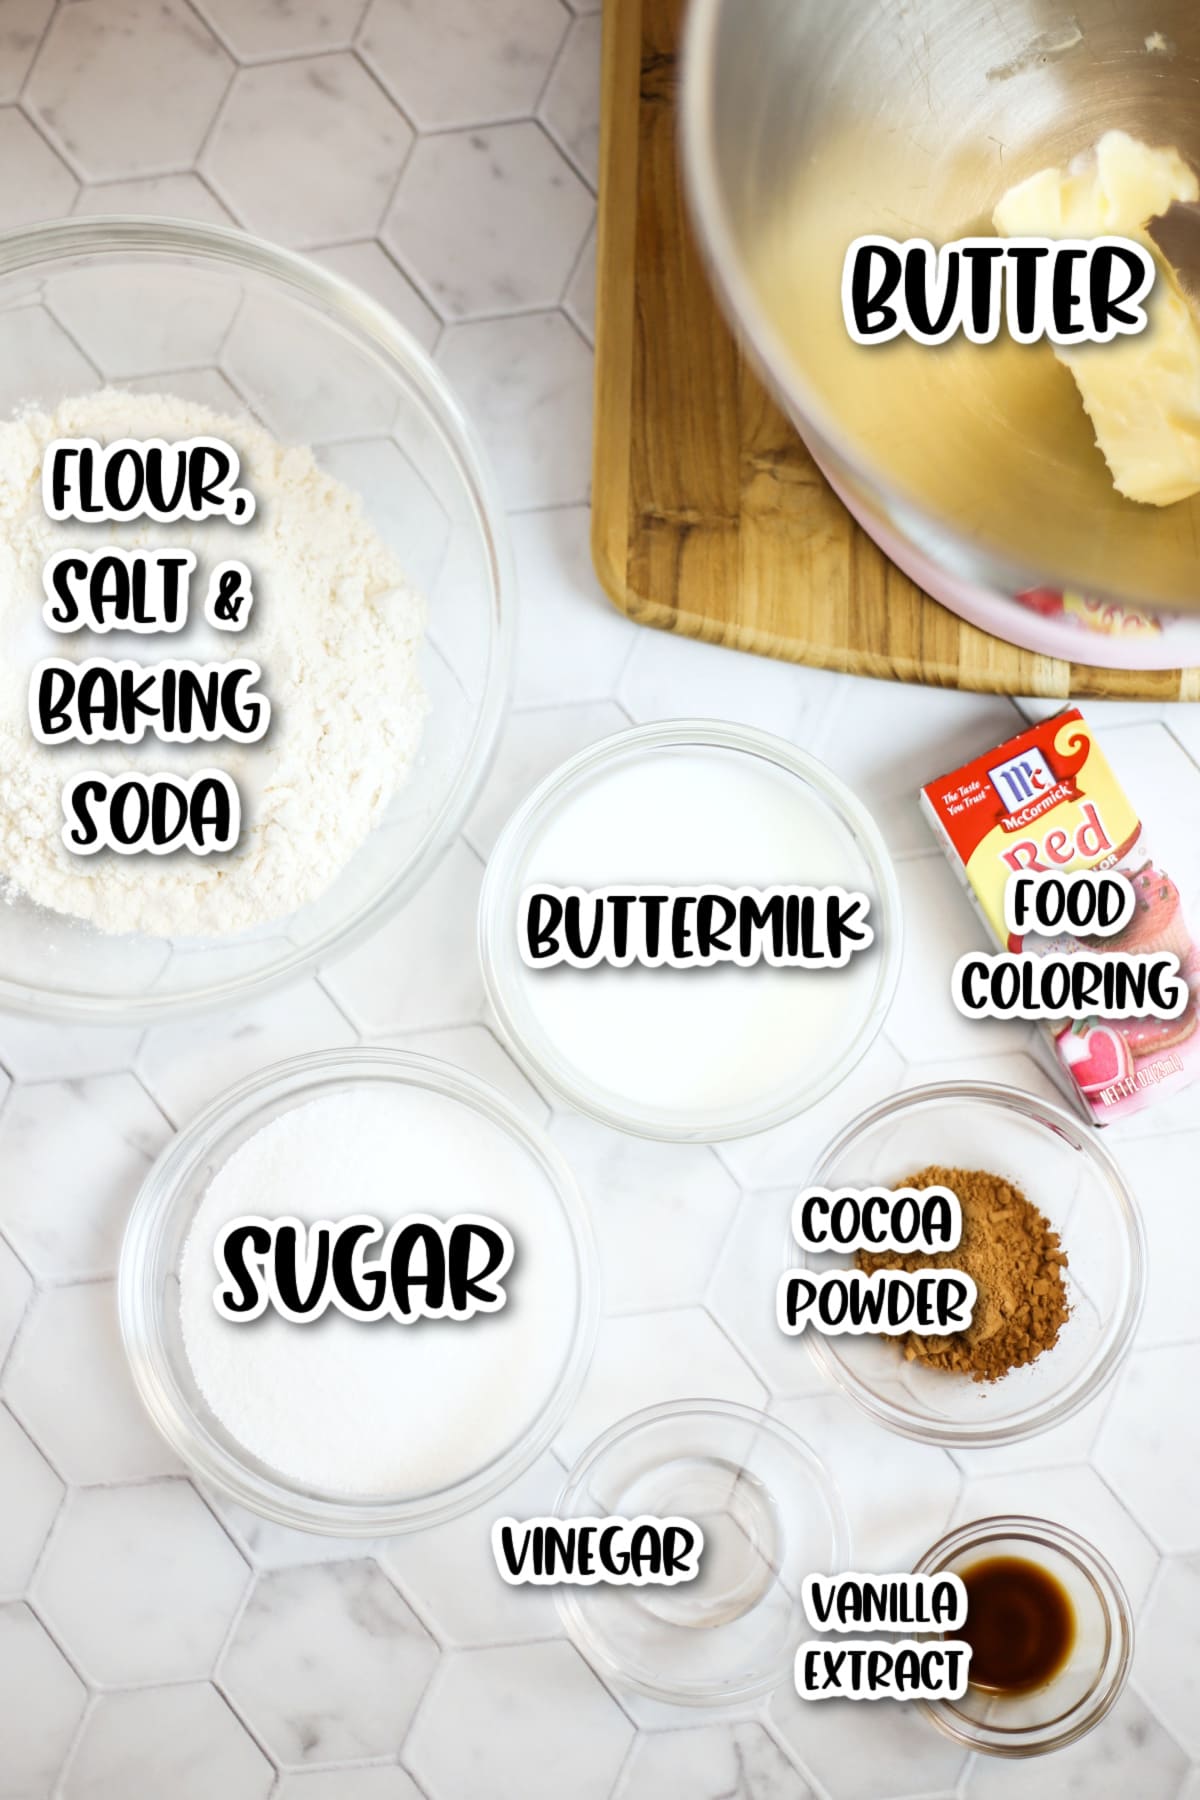 Mickey Mouse Cupcakes ingredients